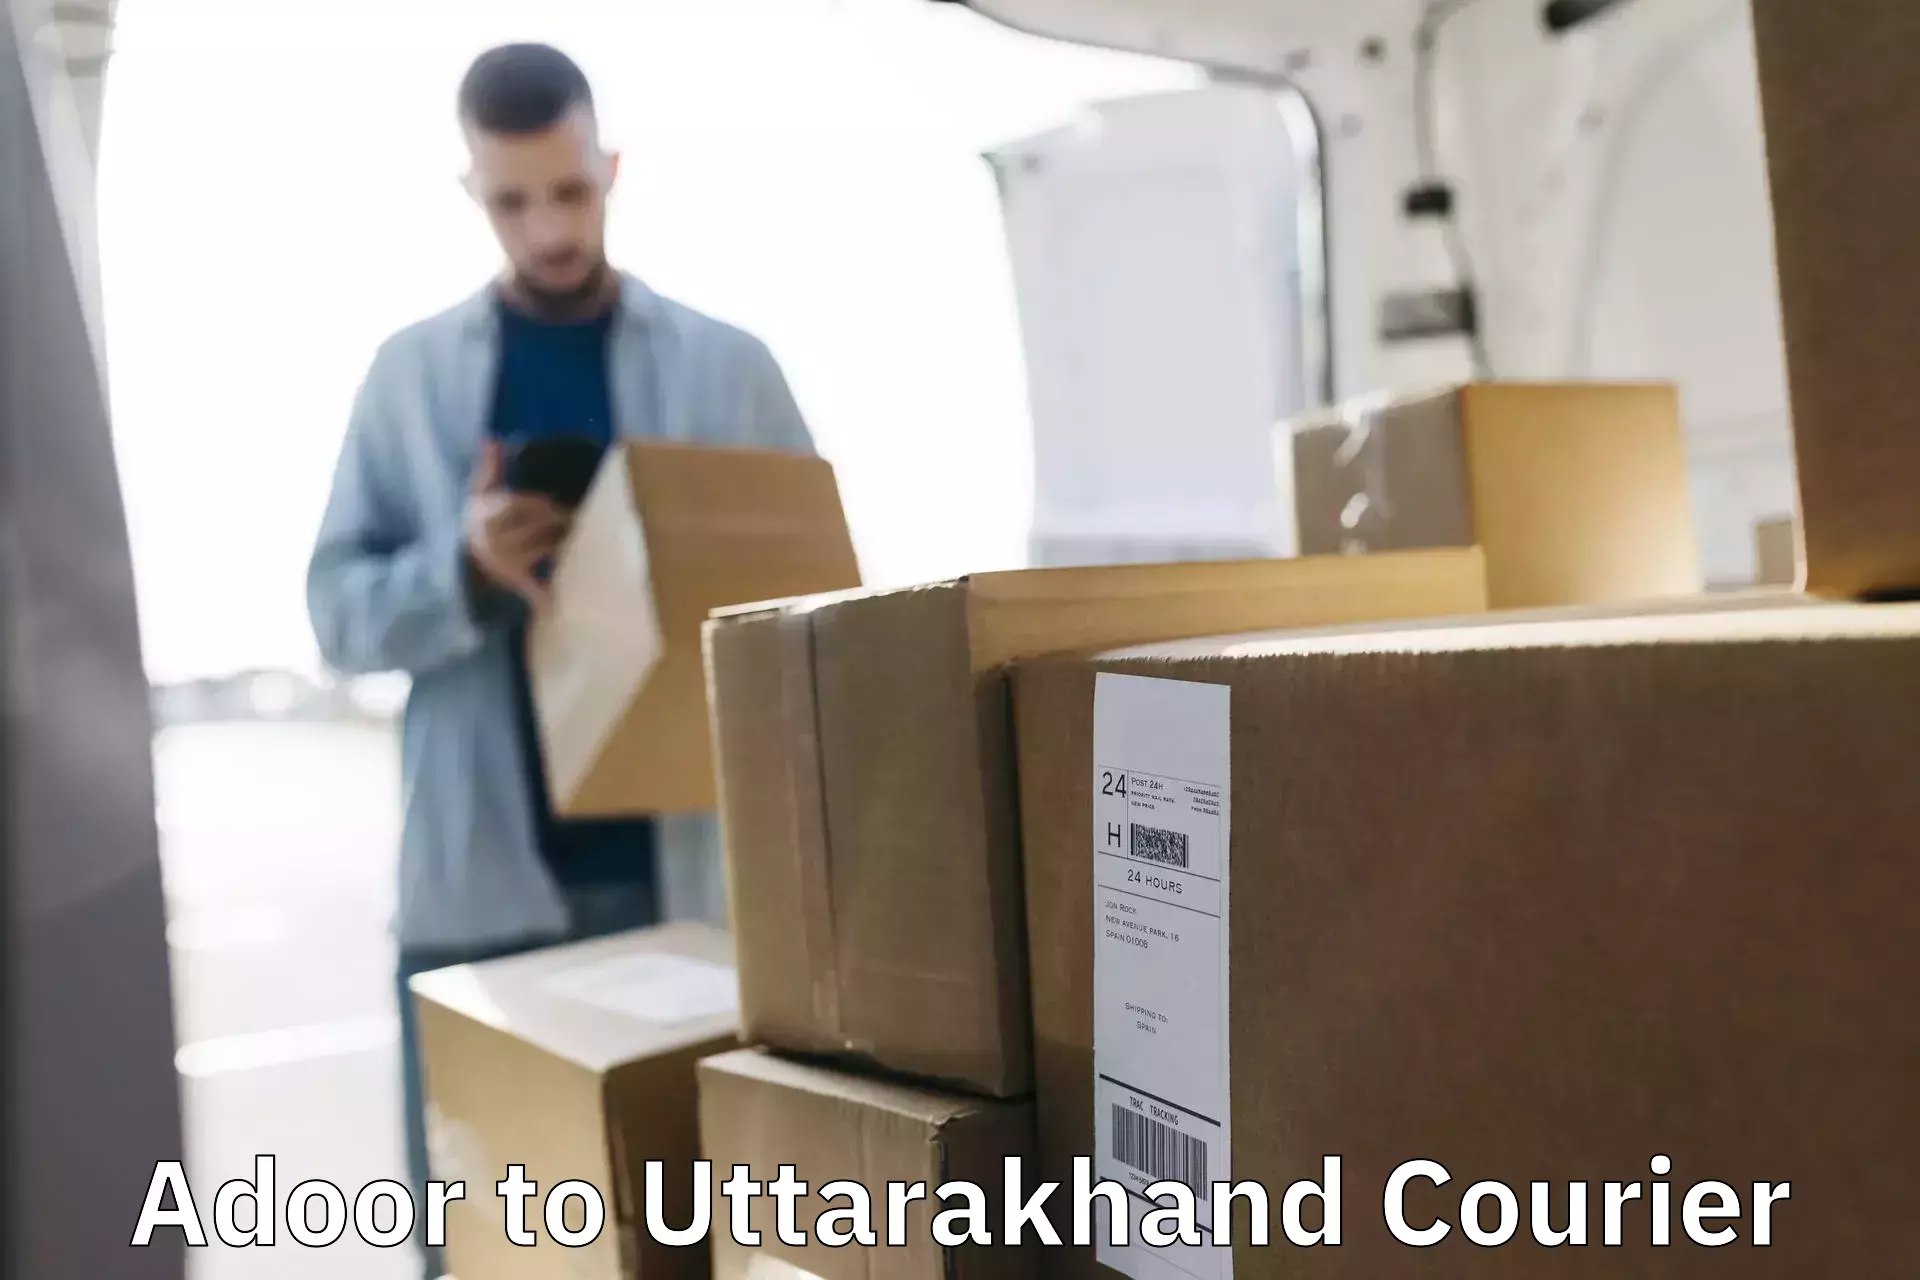 User-friendly courier app Adoor to Nainital